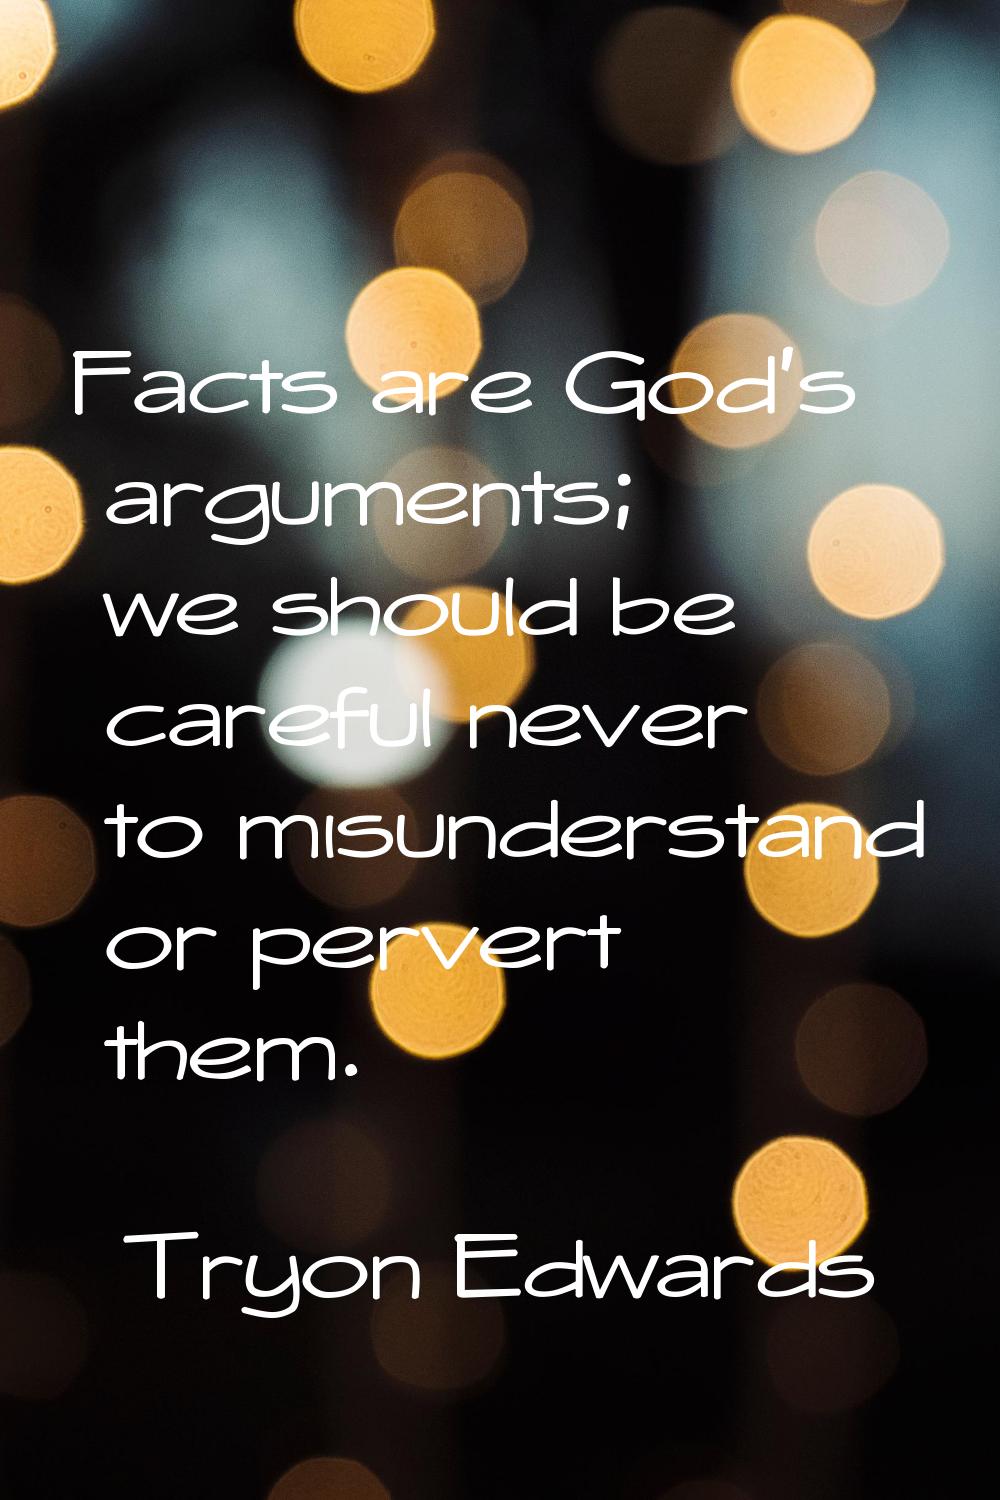 Facts are God's arguments; we should be careful never to misunderstand or pervert them.